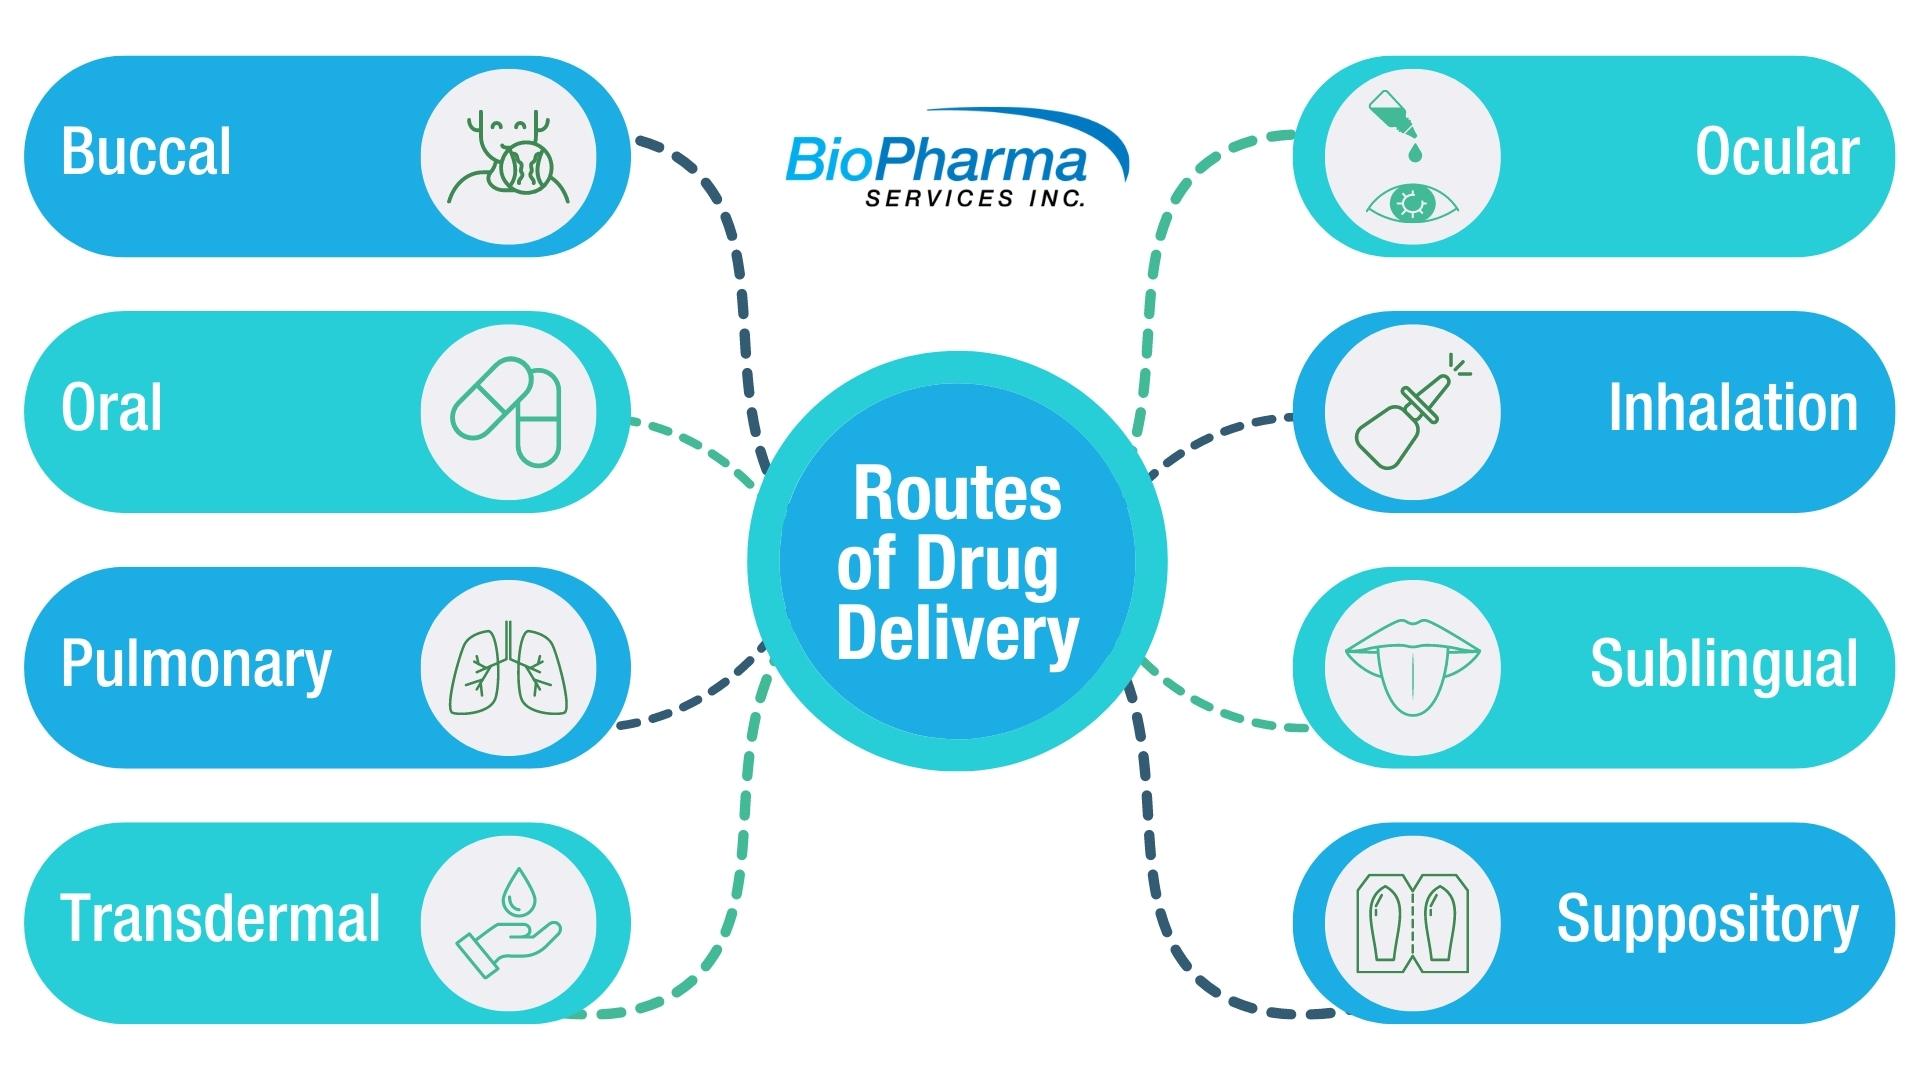 Routes of drug delivery image.